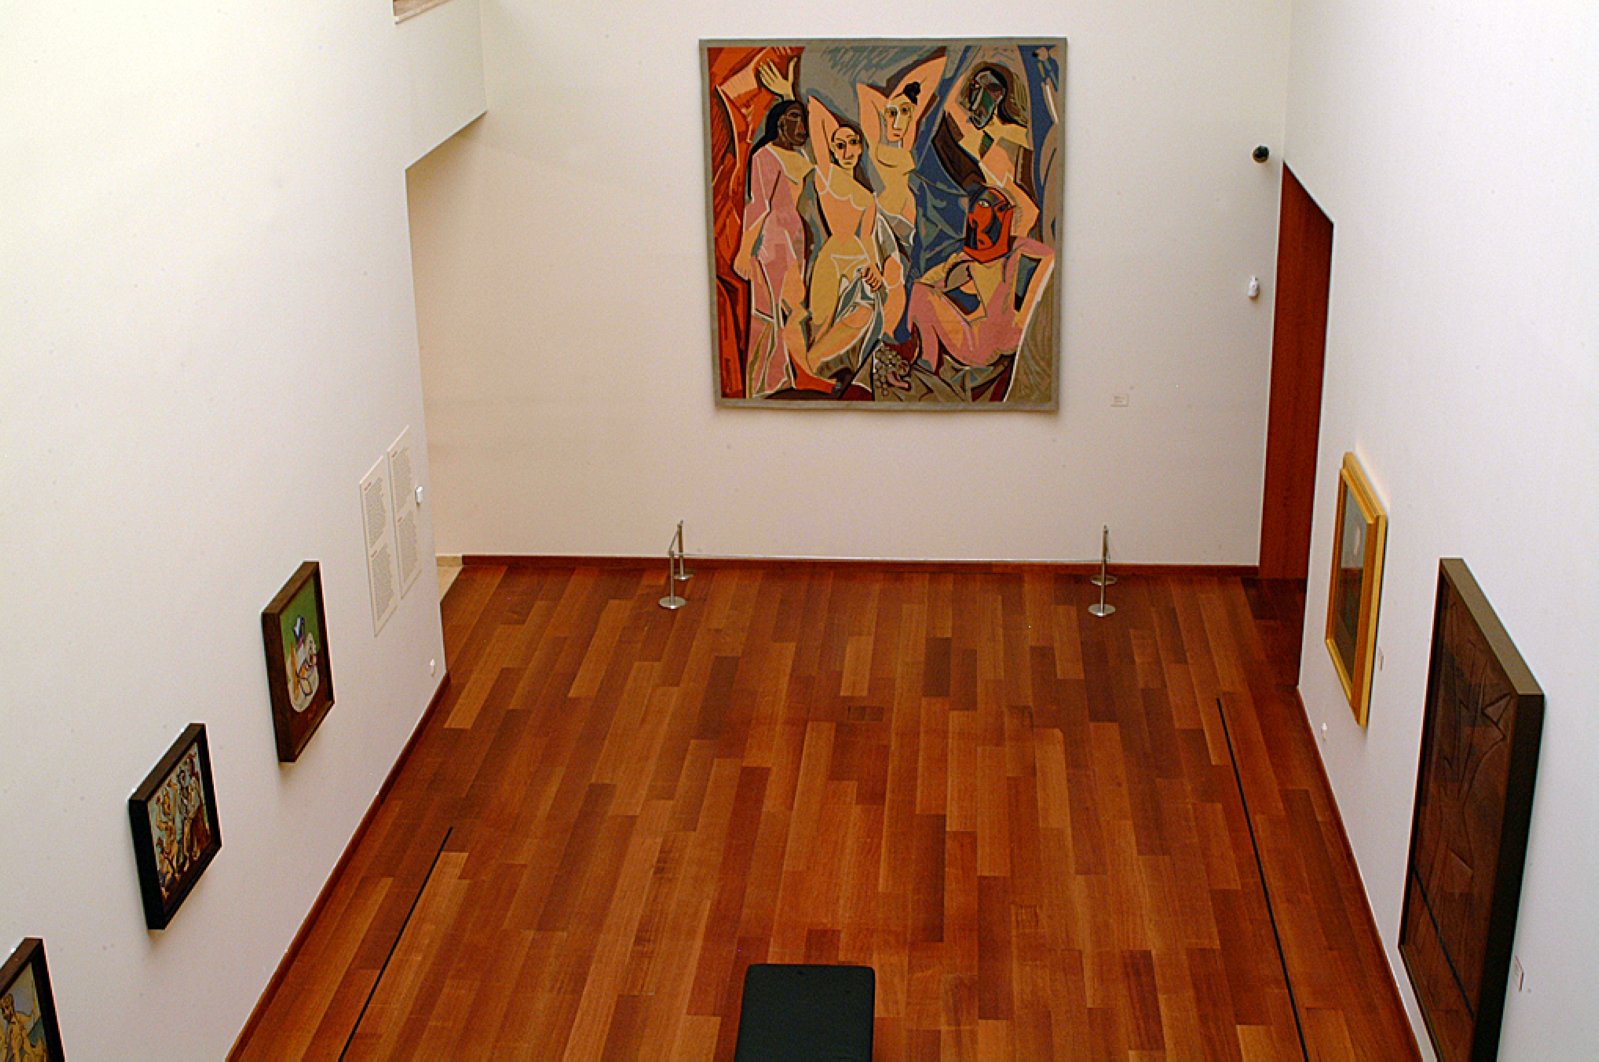 A frame showing some works from the “Picasso in Istanbul” exhibition. (Courtesy of SSM)